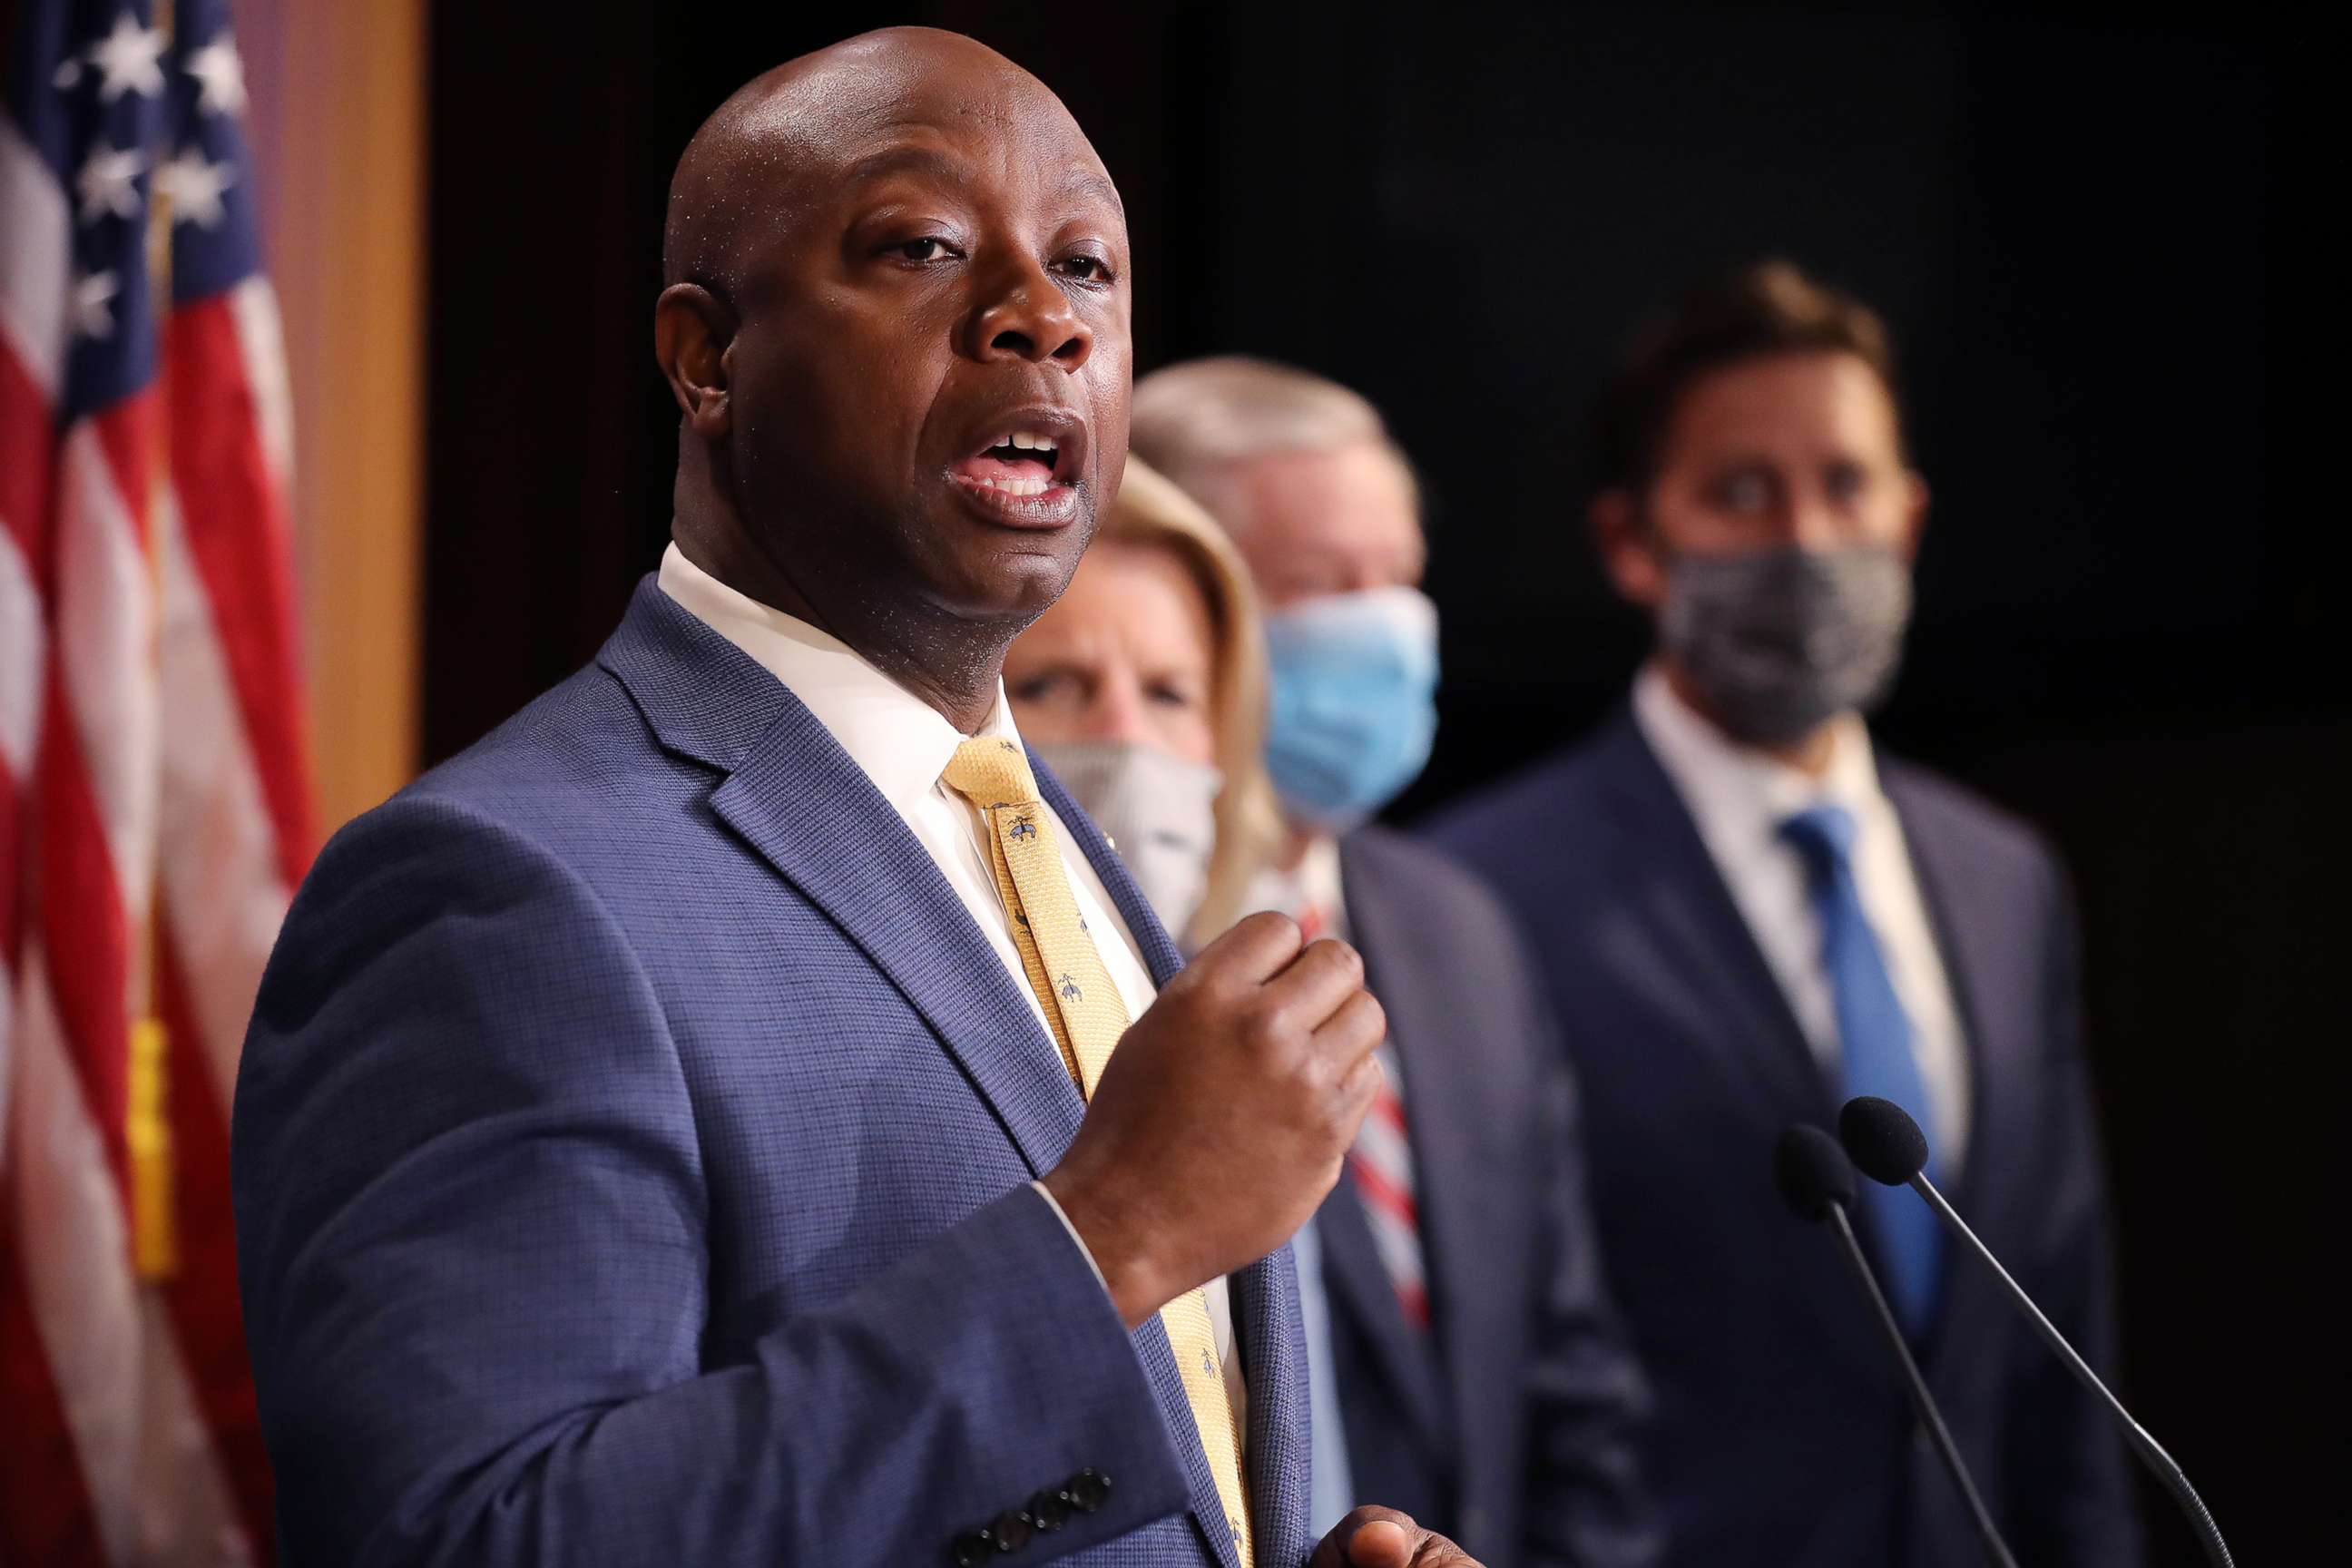 PHOTO: Sen. Tim Scott is joined by fellow Republican lawmakers for a news conference to unveil the GOP's legislation to address racial disparities in law enforcement at the U.S. Capitol, June 17, 2020, in Washington, D.C.